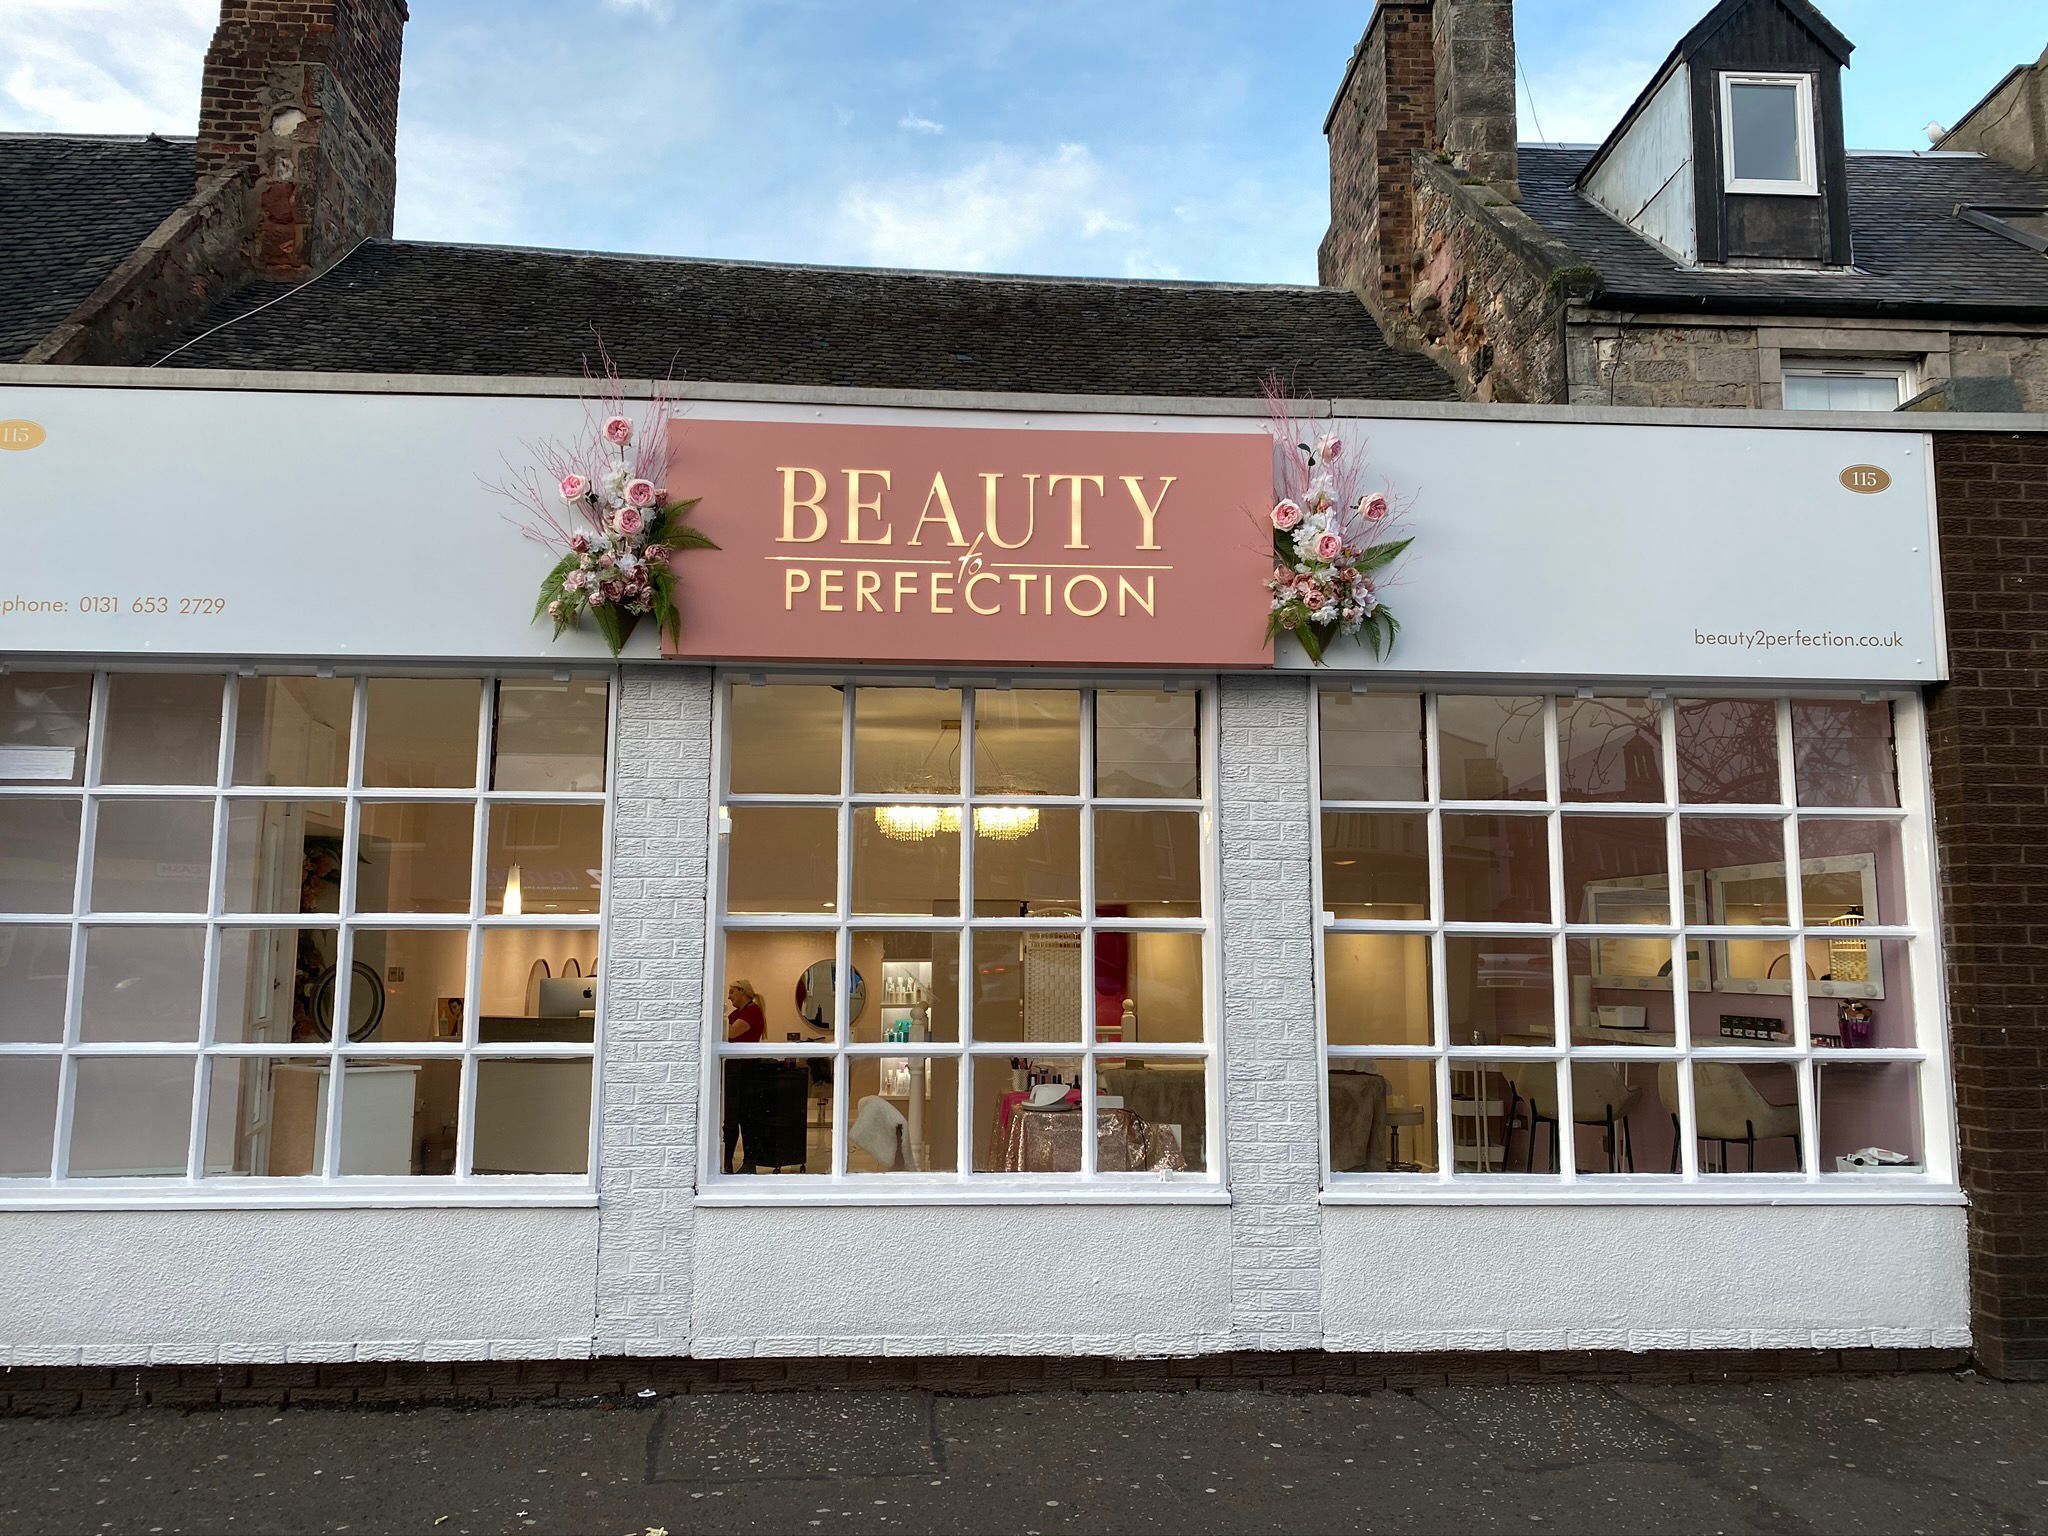 North High Street, Musselburgh, East Lothian, EH21 6JE